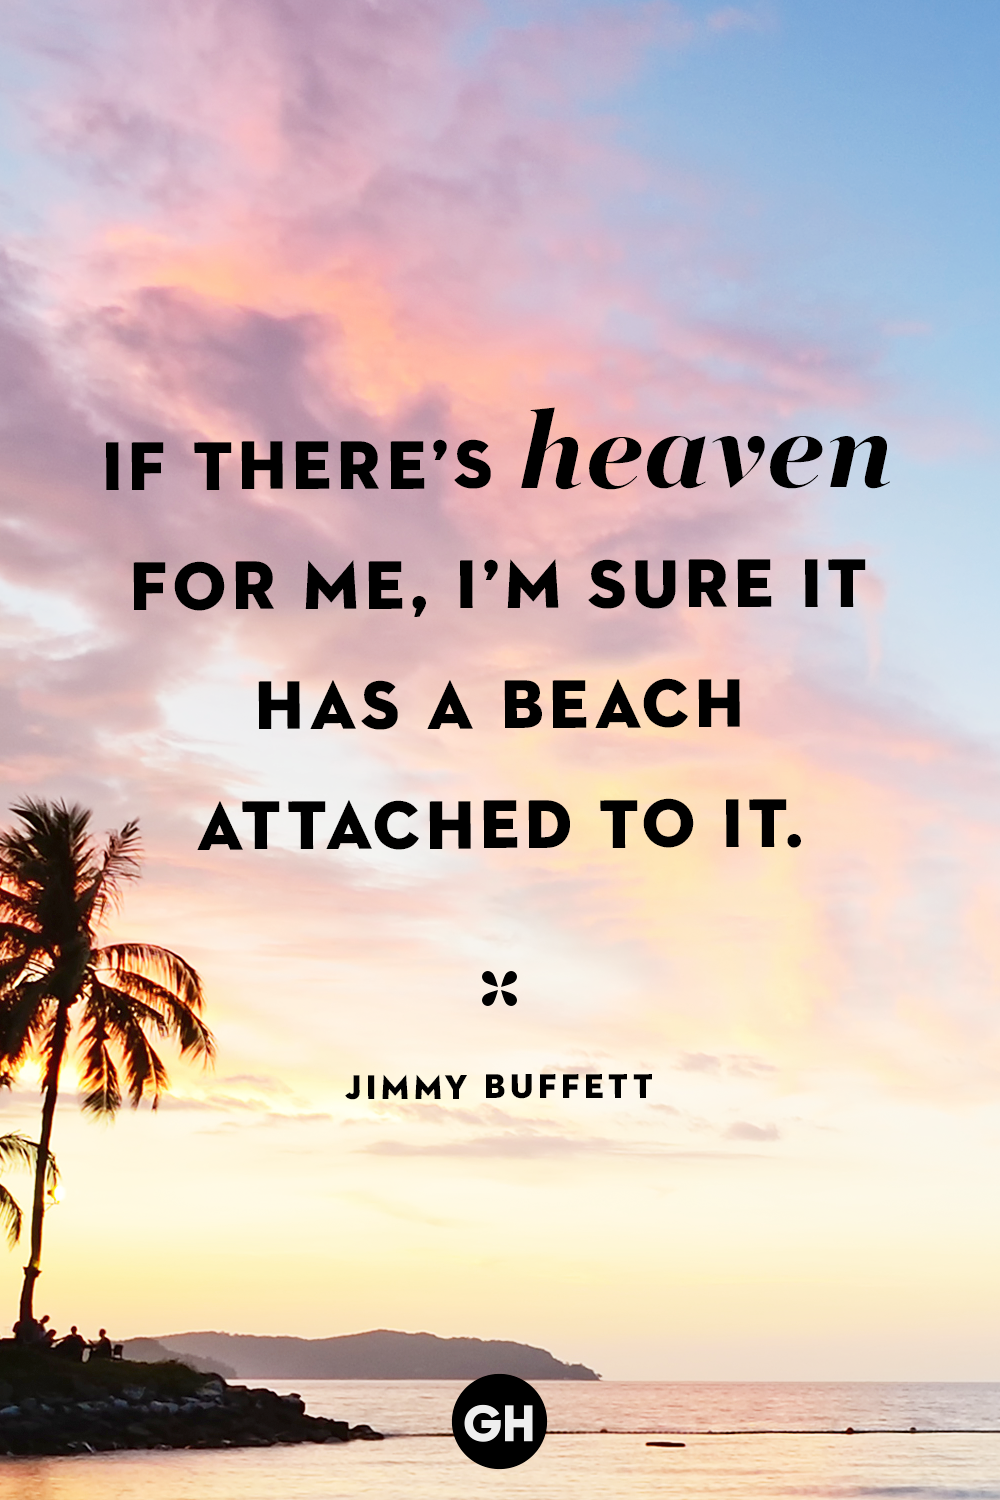 12 Best Beach Quotes   Sayings and Quotes About the Beach